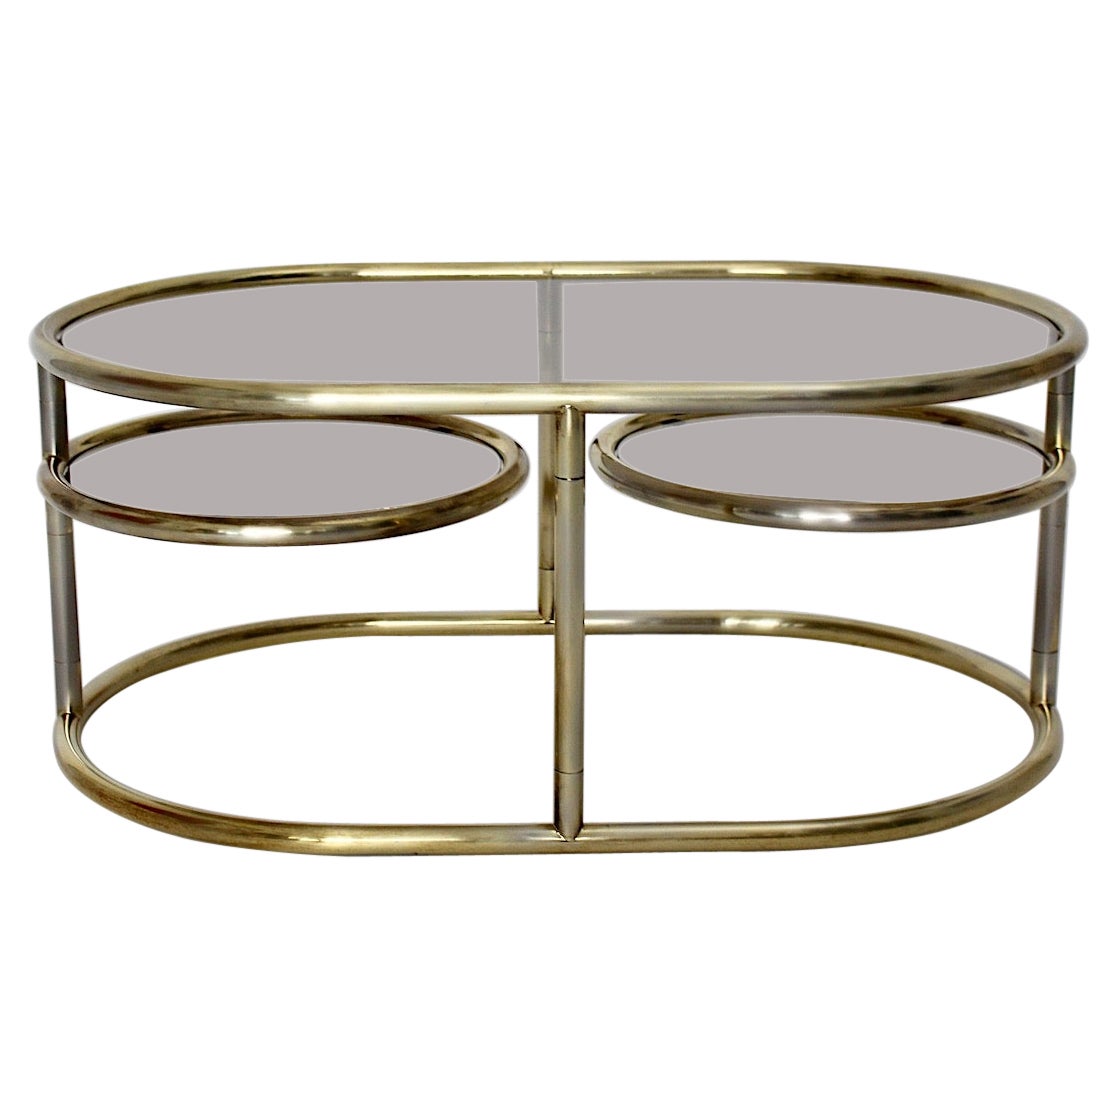 Modernist Vintage Golden Metal Glass Oval Coffee Table Sofa Table, 1960s, Italy